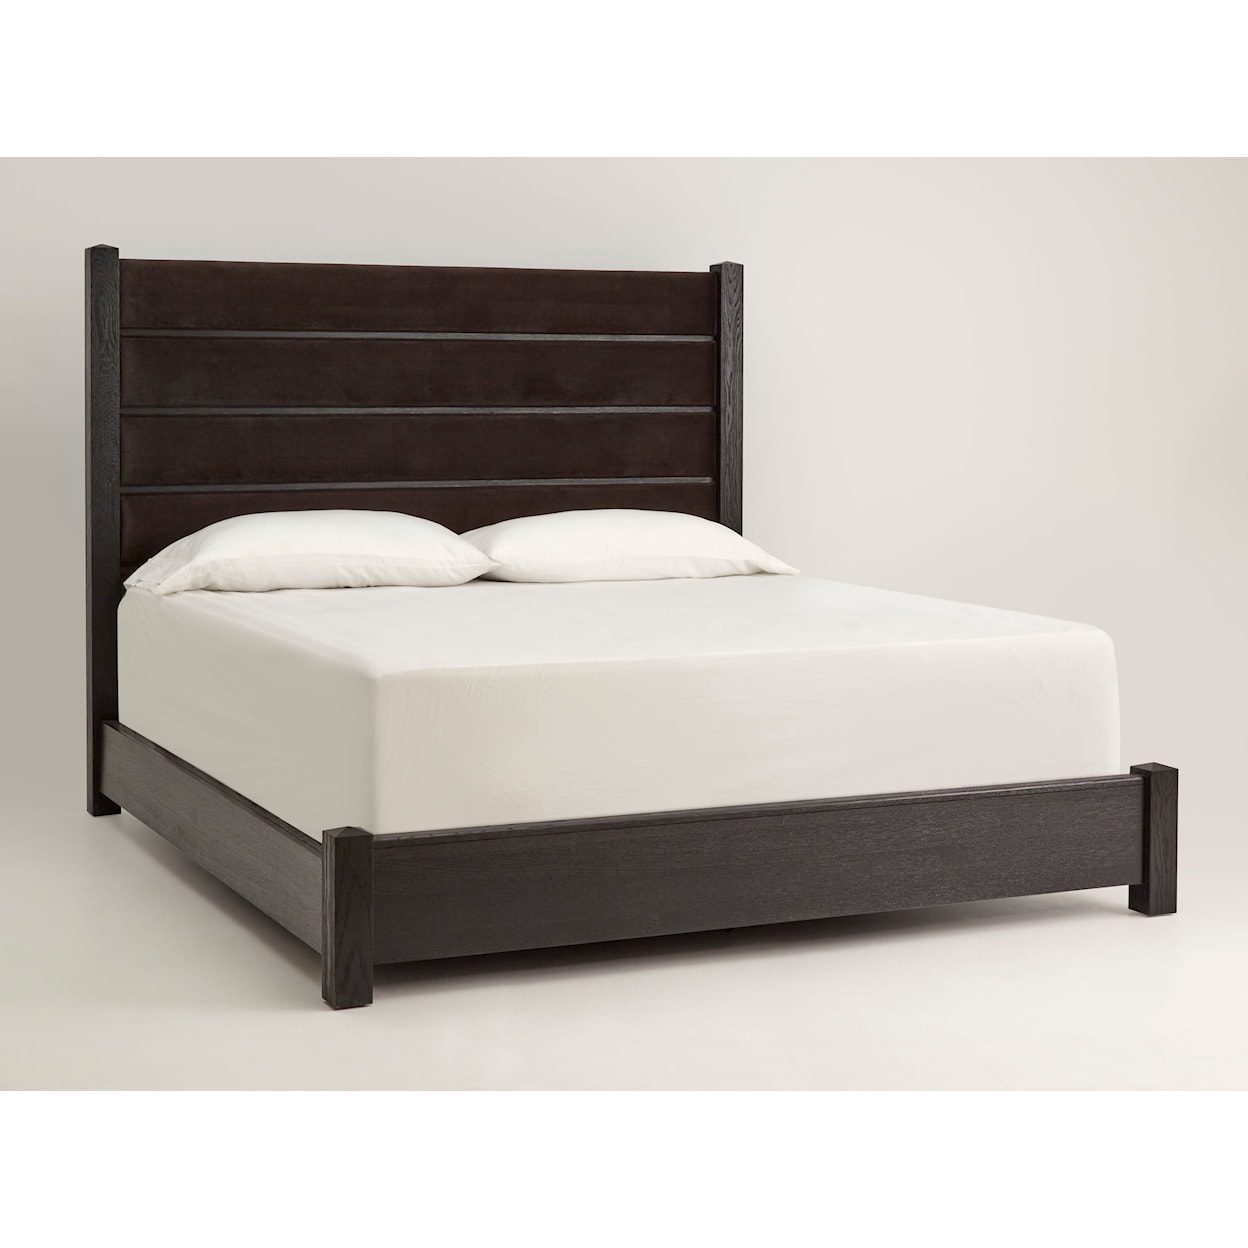 The Preserve Turner Queen Bed